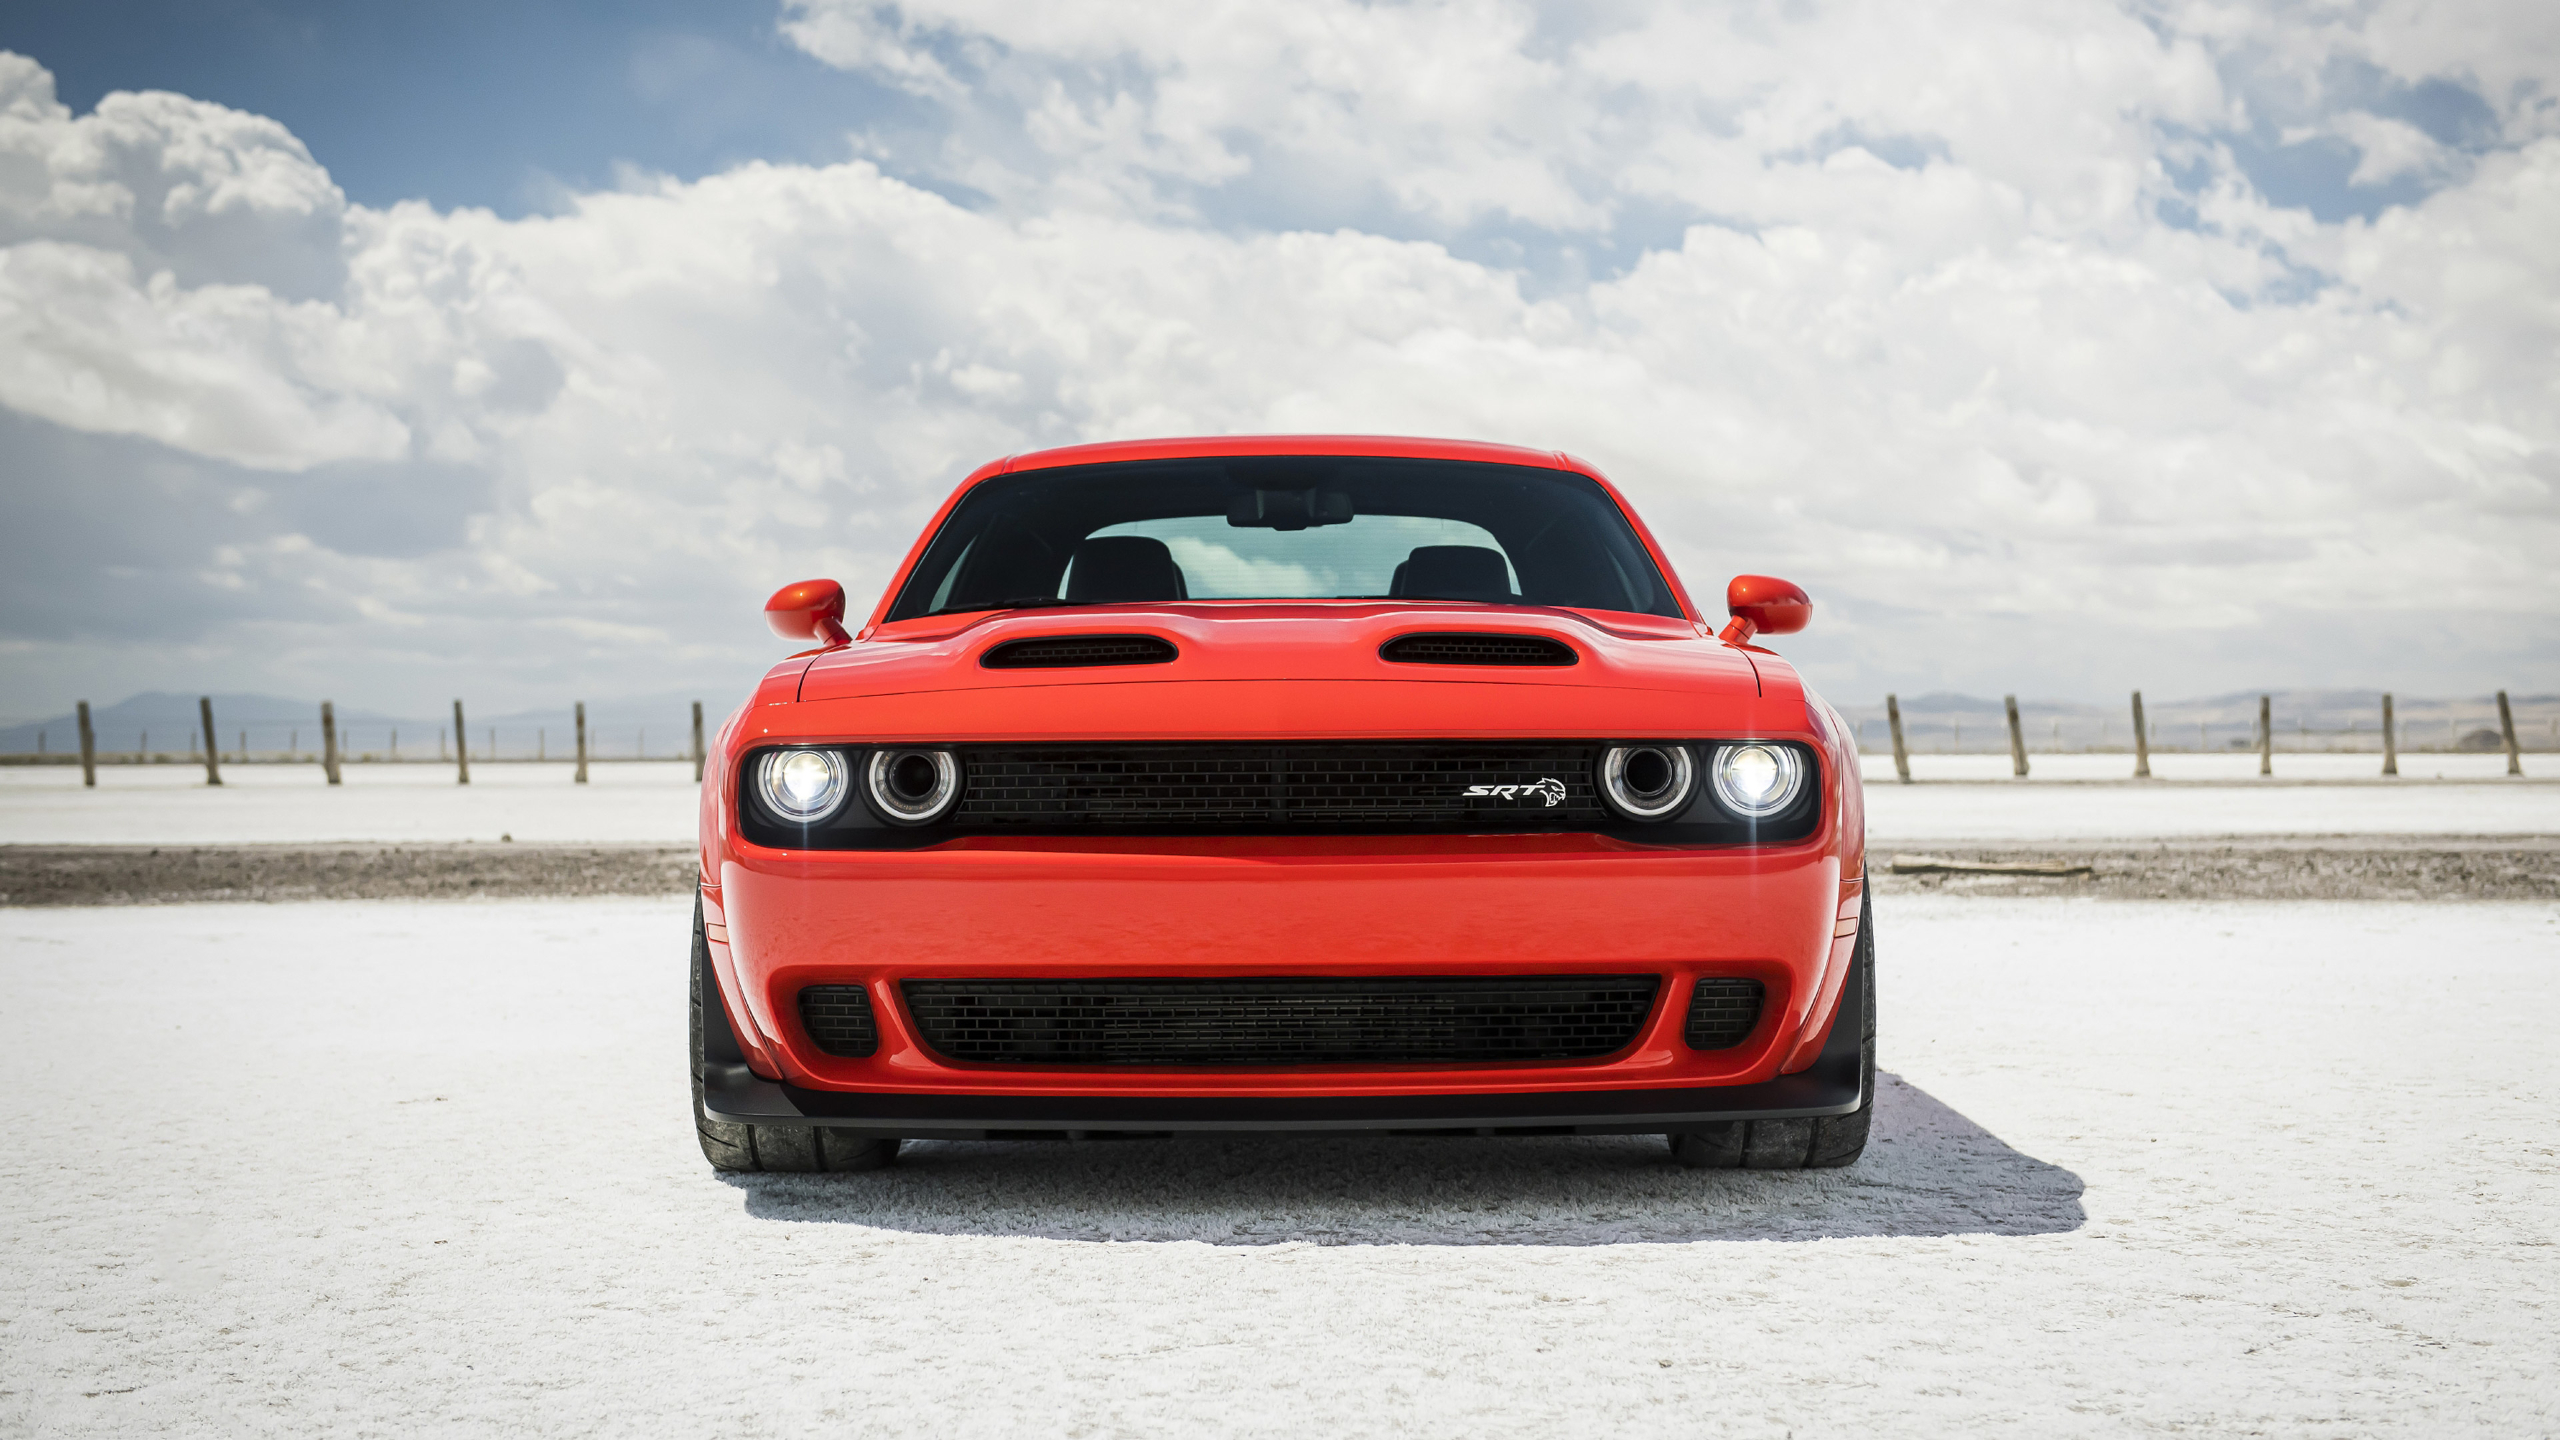 General 2560x1440 Dodge Challenger hellcat muscle cars car vehicle red cars